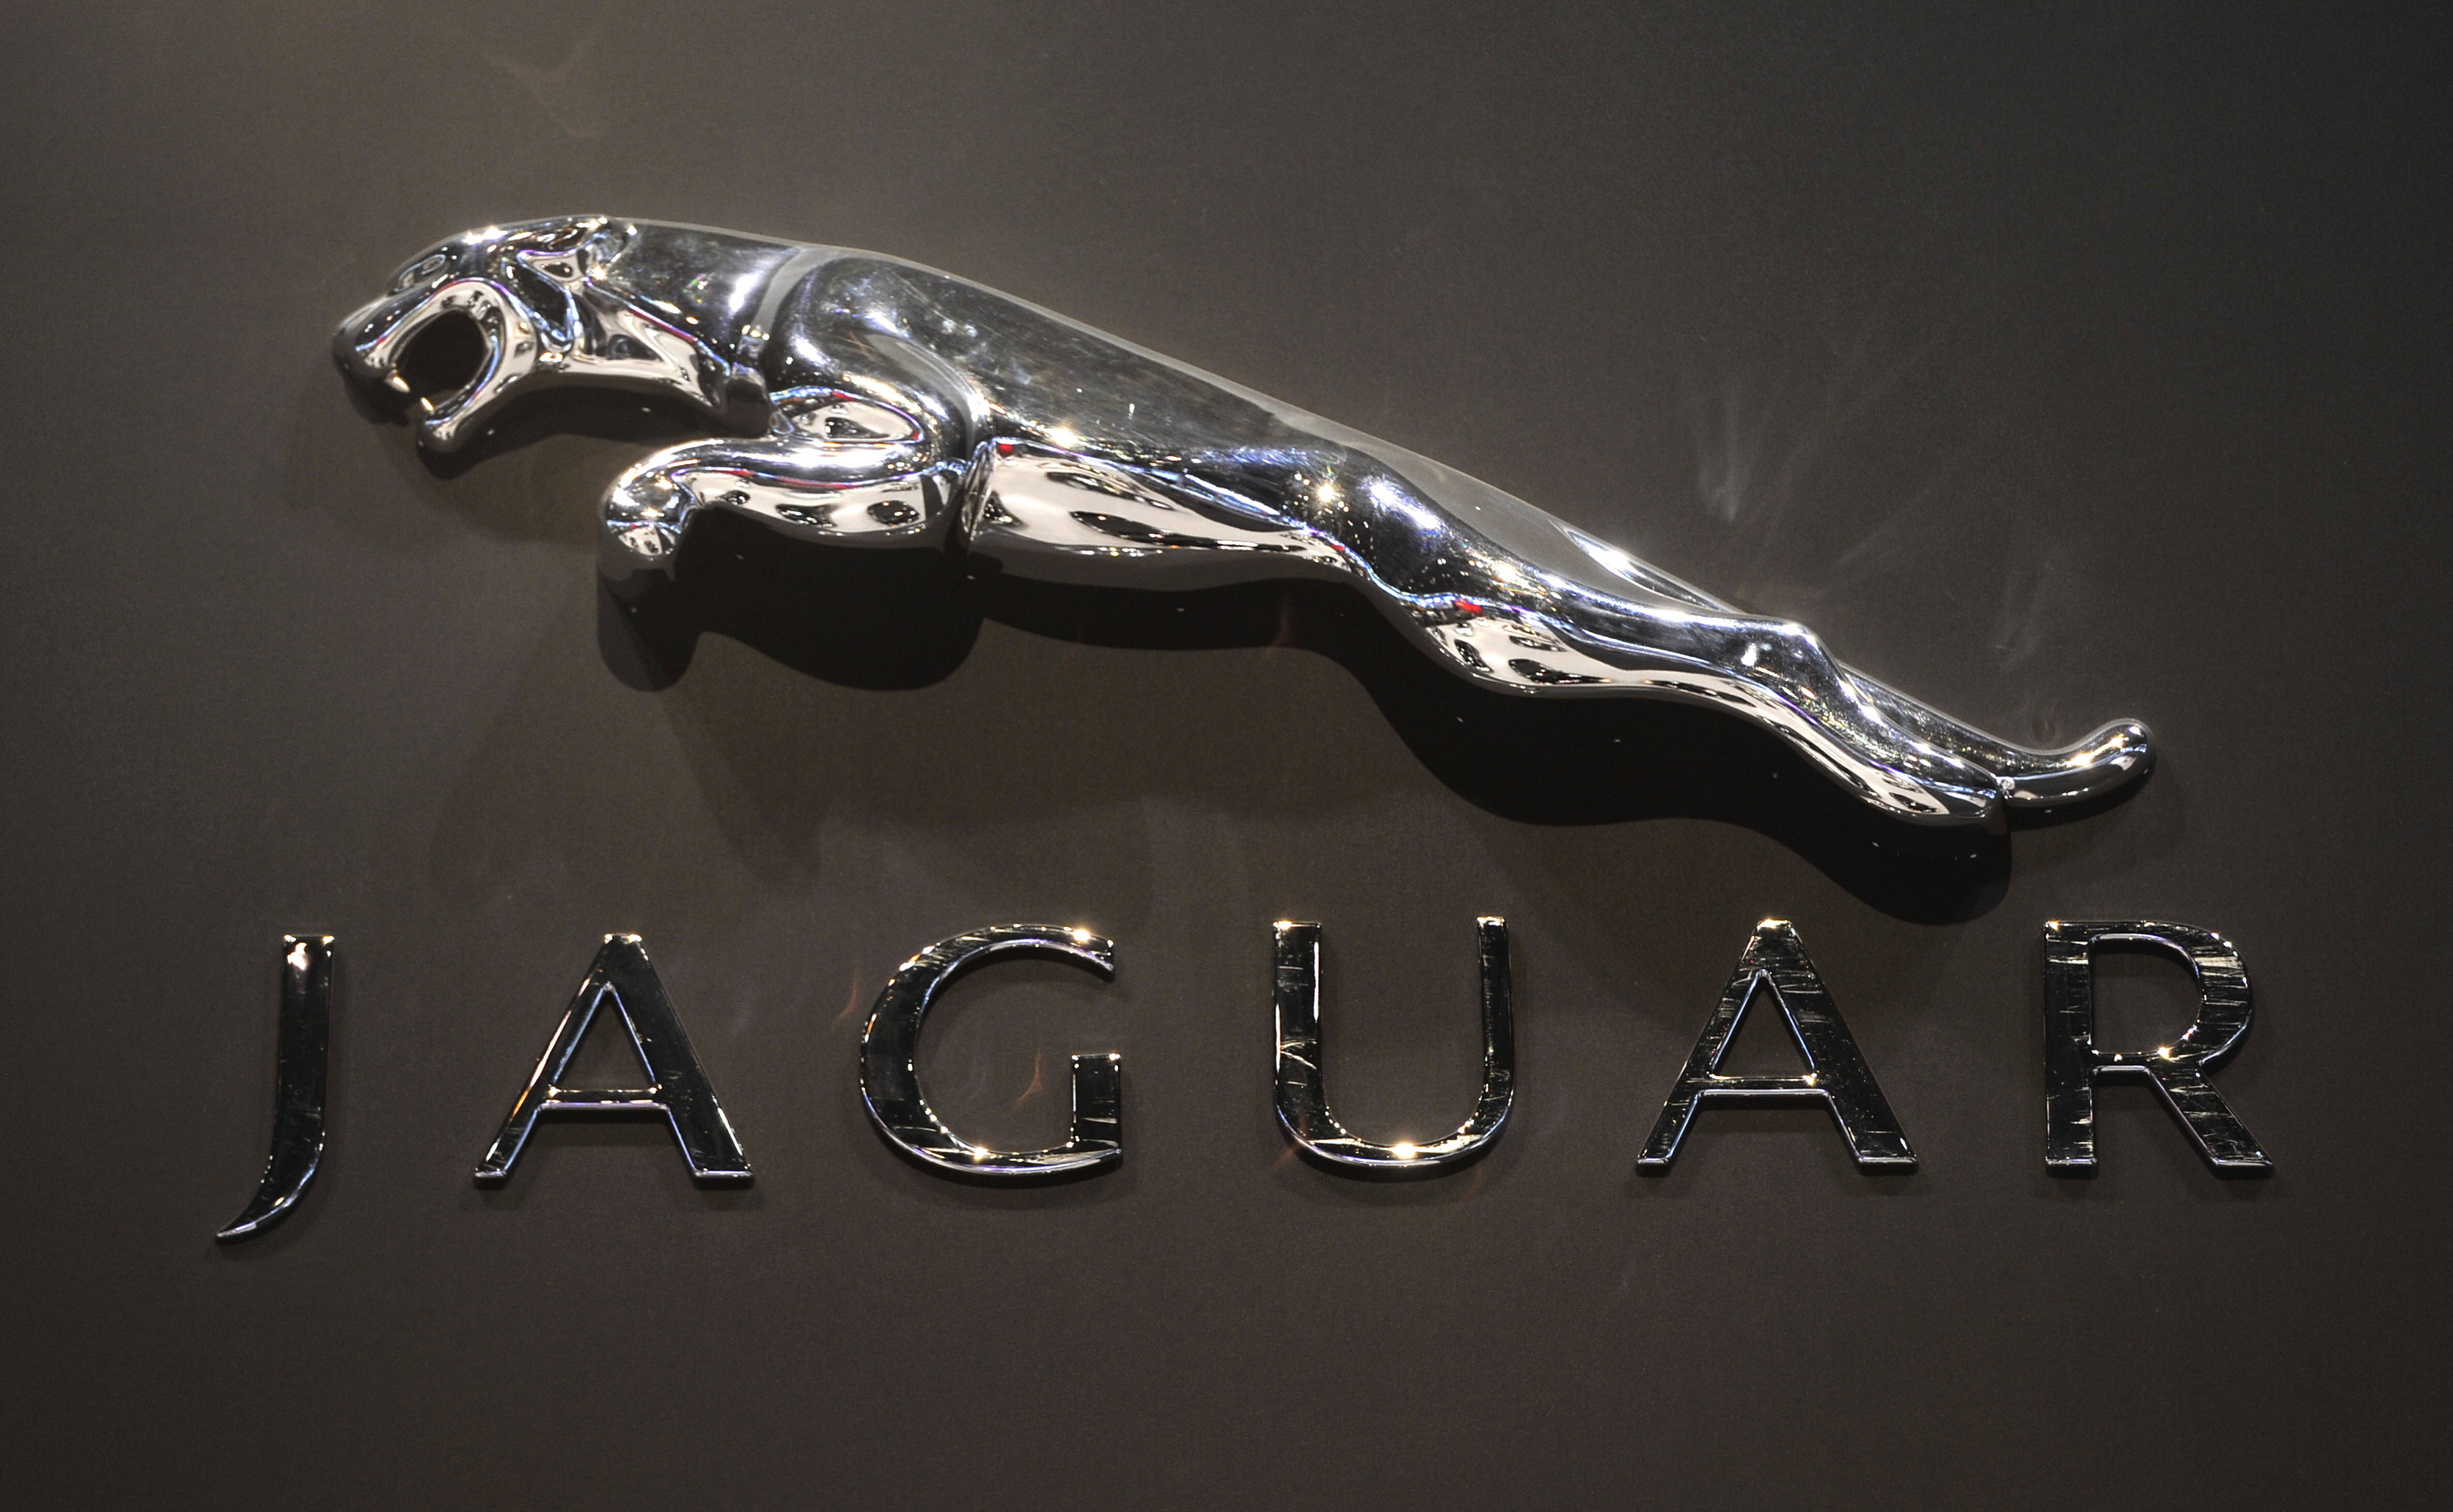 The logo for Jaguar is displayed at the Chicago Auto Show at McCormick Place in Chicago on February 9, 2011.    UPI/Brian Kersey